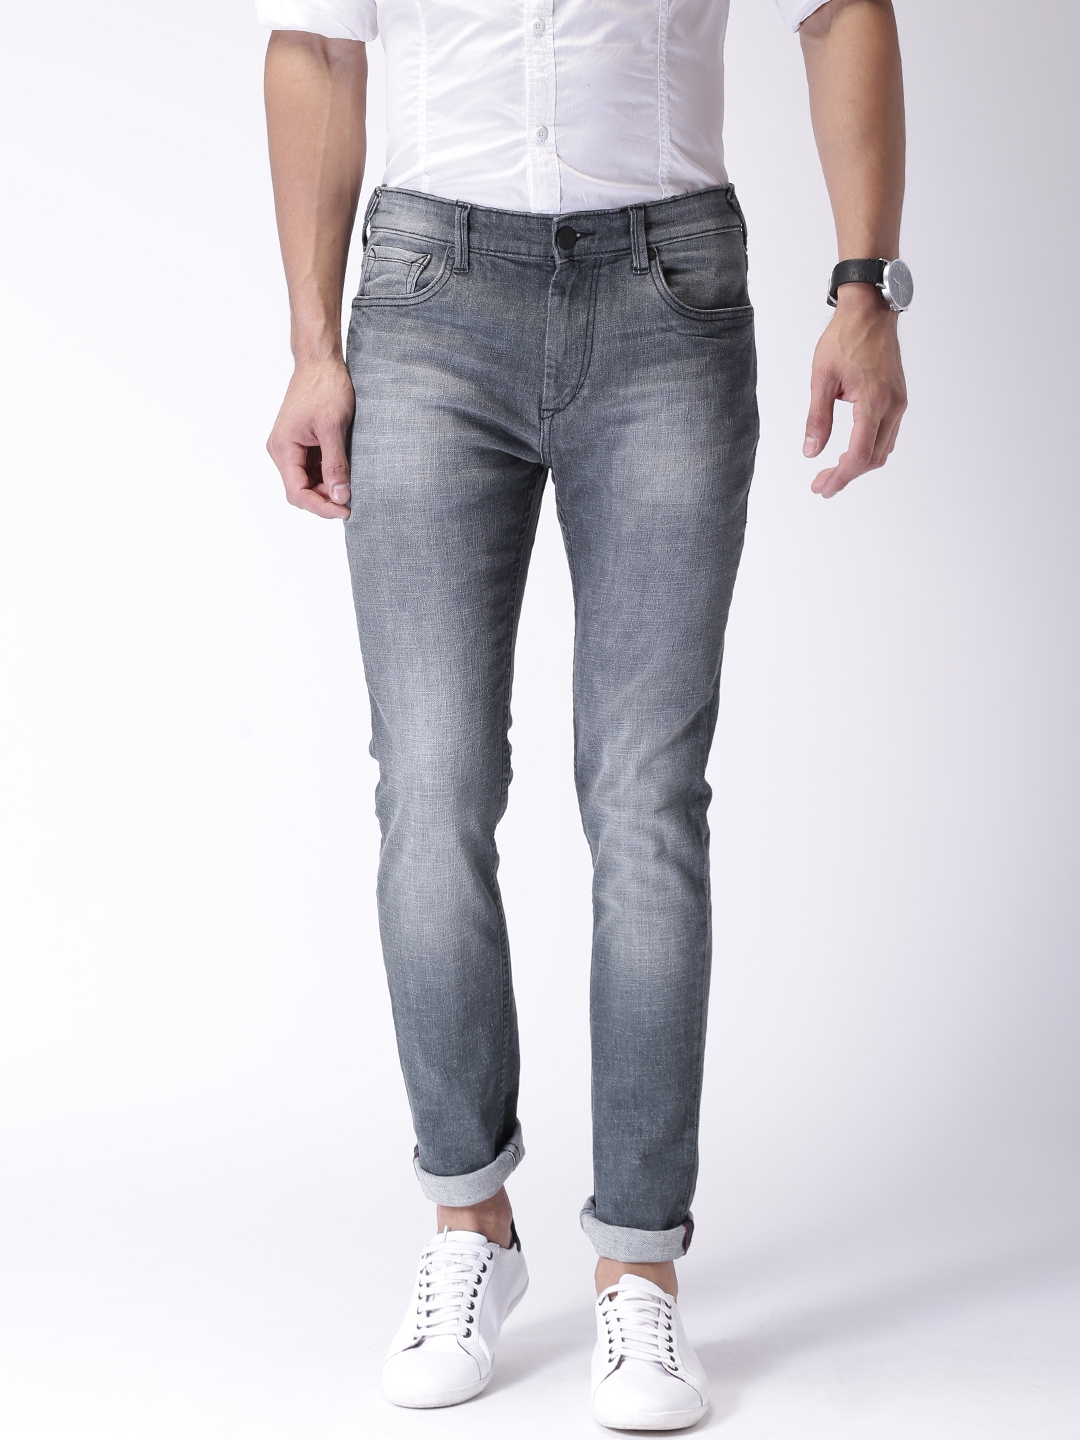 Buy Moda Rapido Grey Washed Skinny Fit Jeans - Jeans for Men 1384422 ...